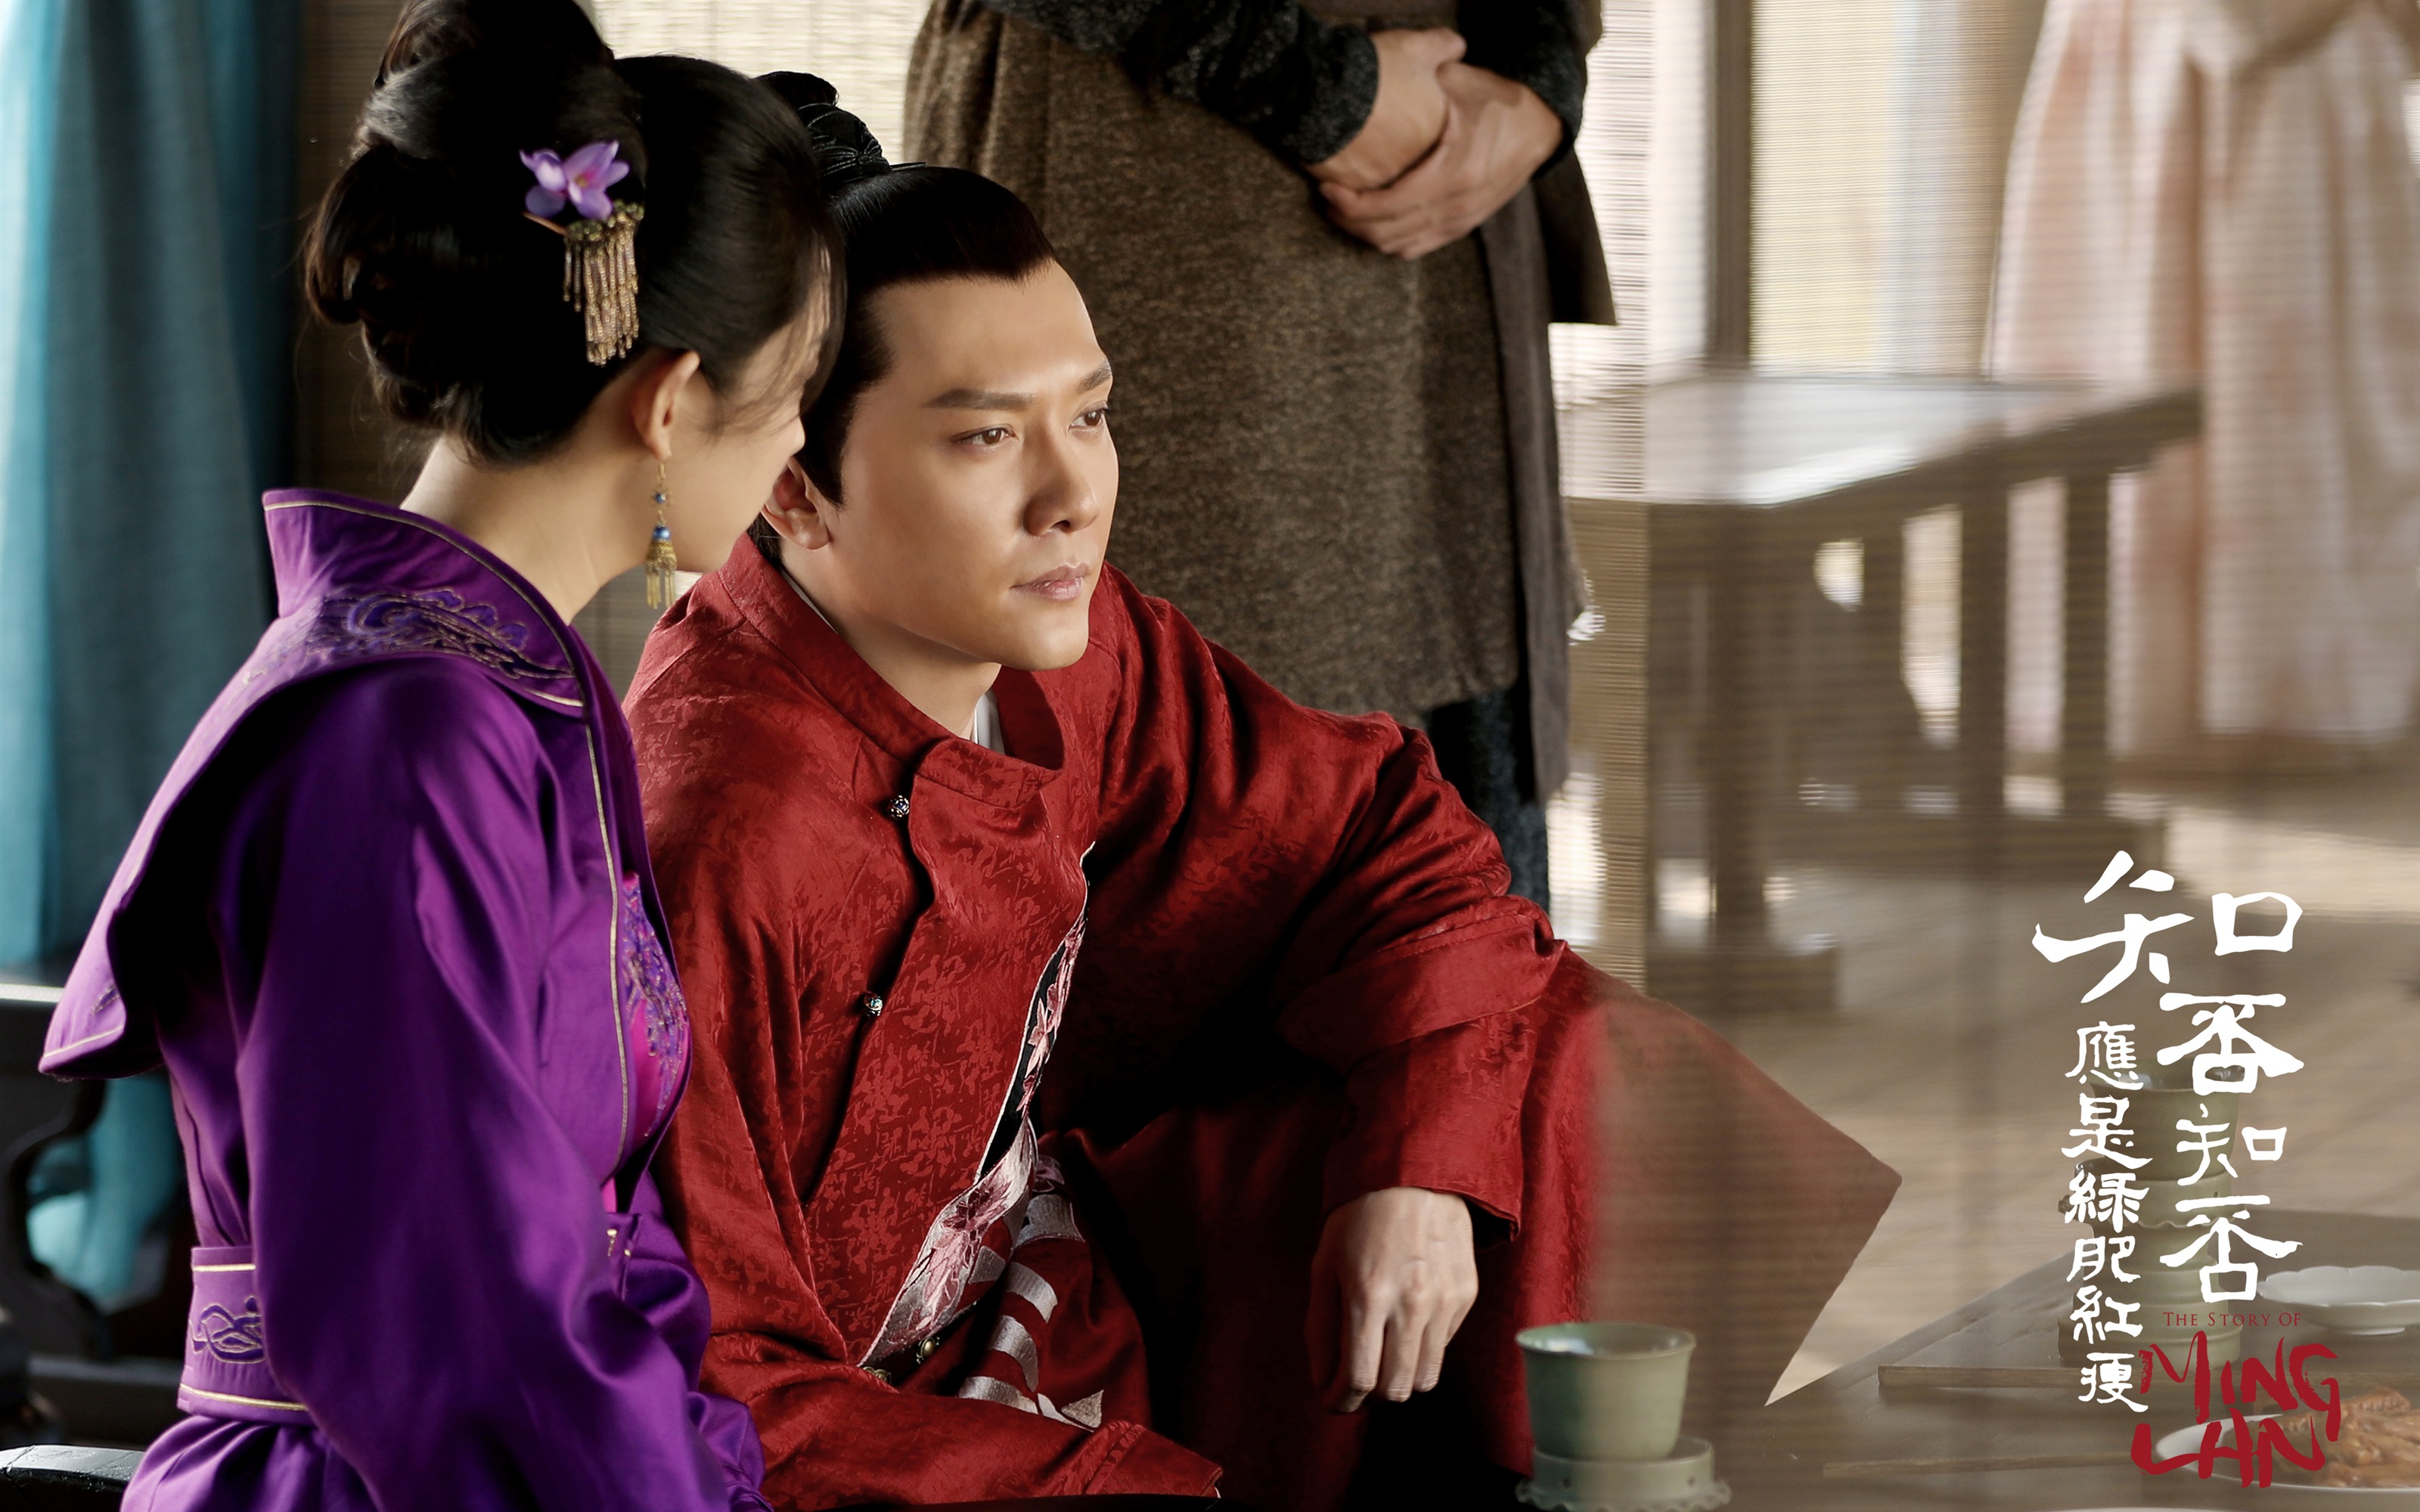 The Story Of MingLan, TV series HD wallpapers #42 - 3200x2000